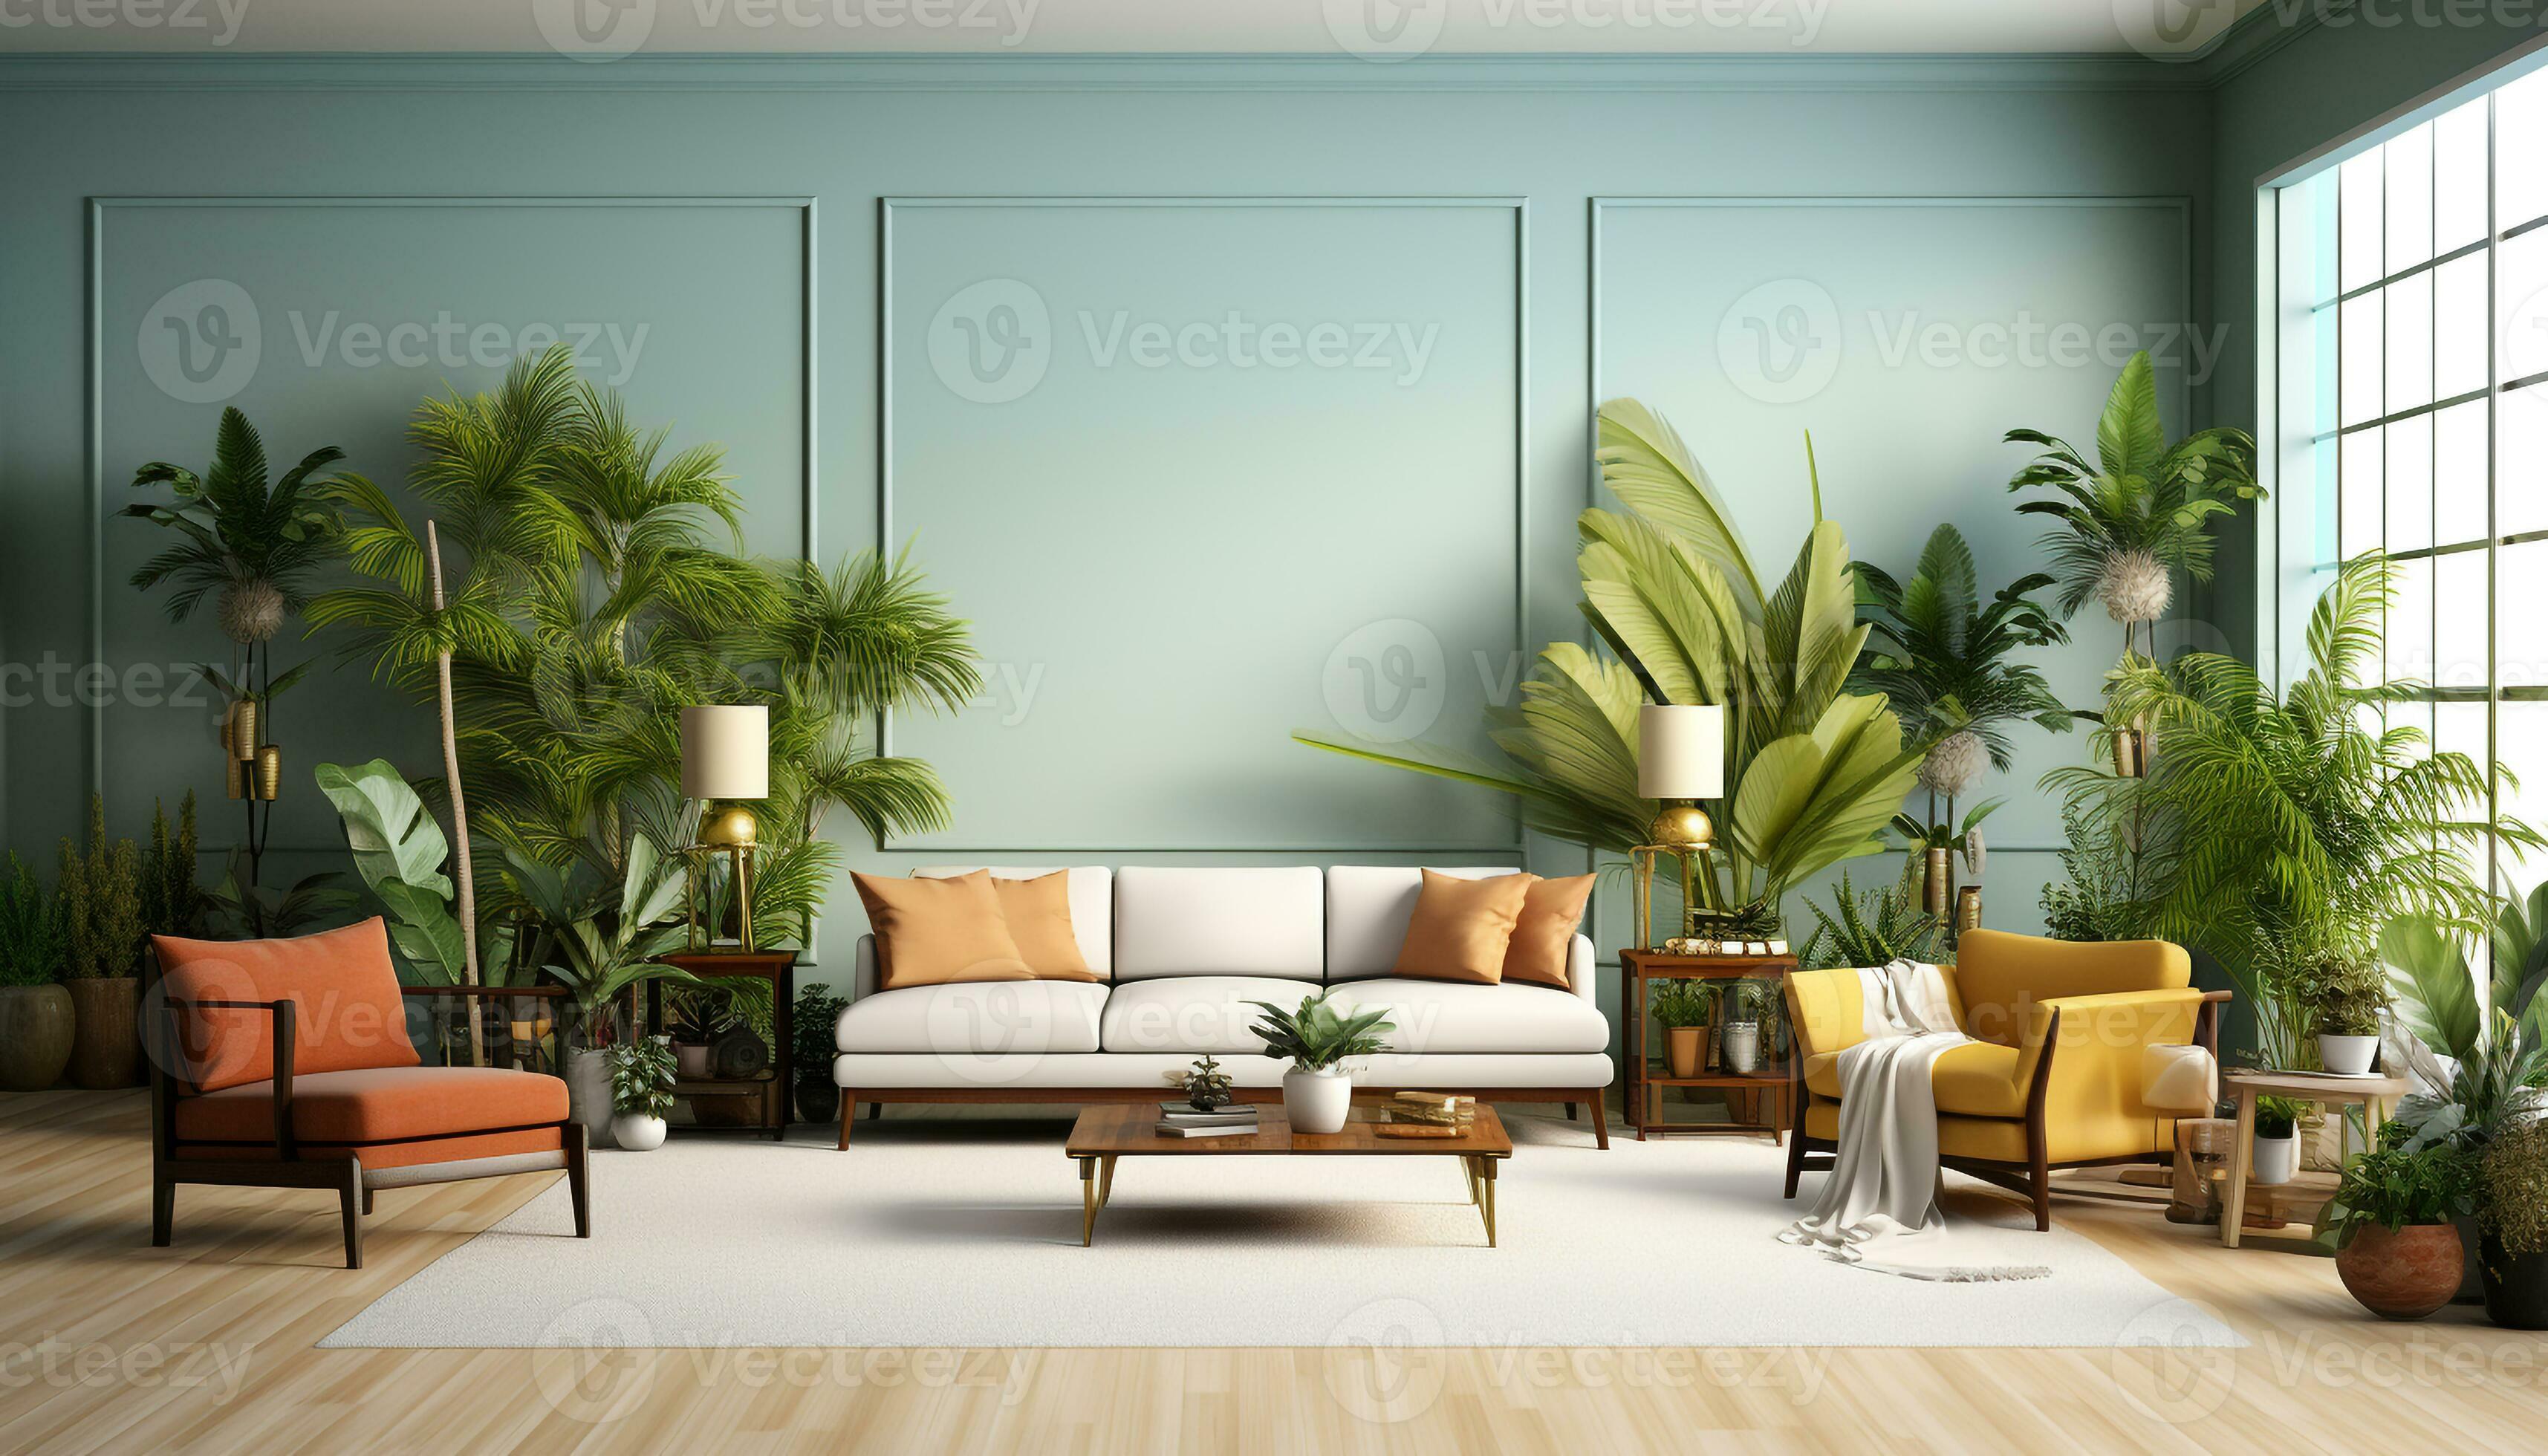 https://static.vecteezy.com/system/resources/previews/033/037/200/large_2x/modern-apartment-with-bright-elegant-interior-comfortable-sofa-wooden-flooring-green-plants-generated-by-ai-photo.jpg